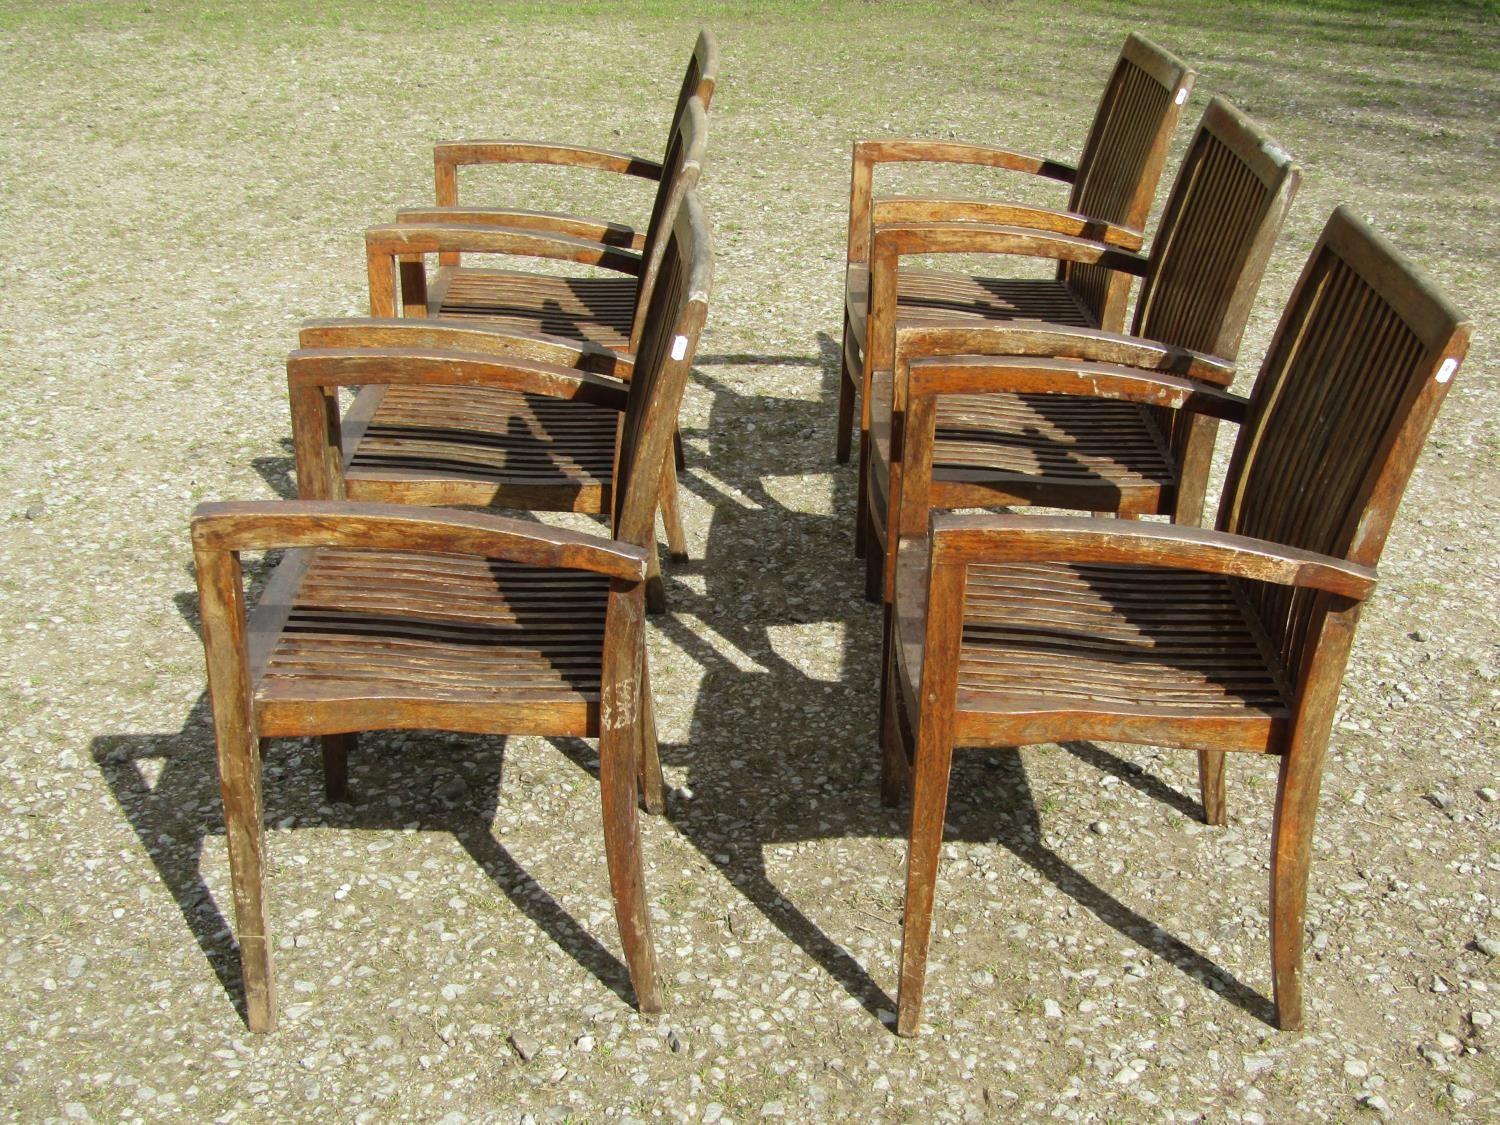 A set of six Nauteak good quality weathered stained teak garden open arm chairs with slender slatted - Image 2 of 4